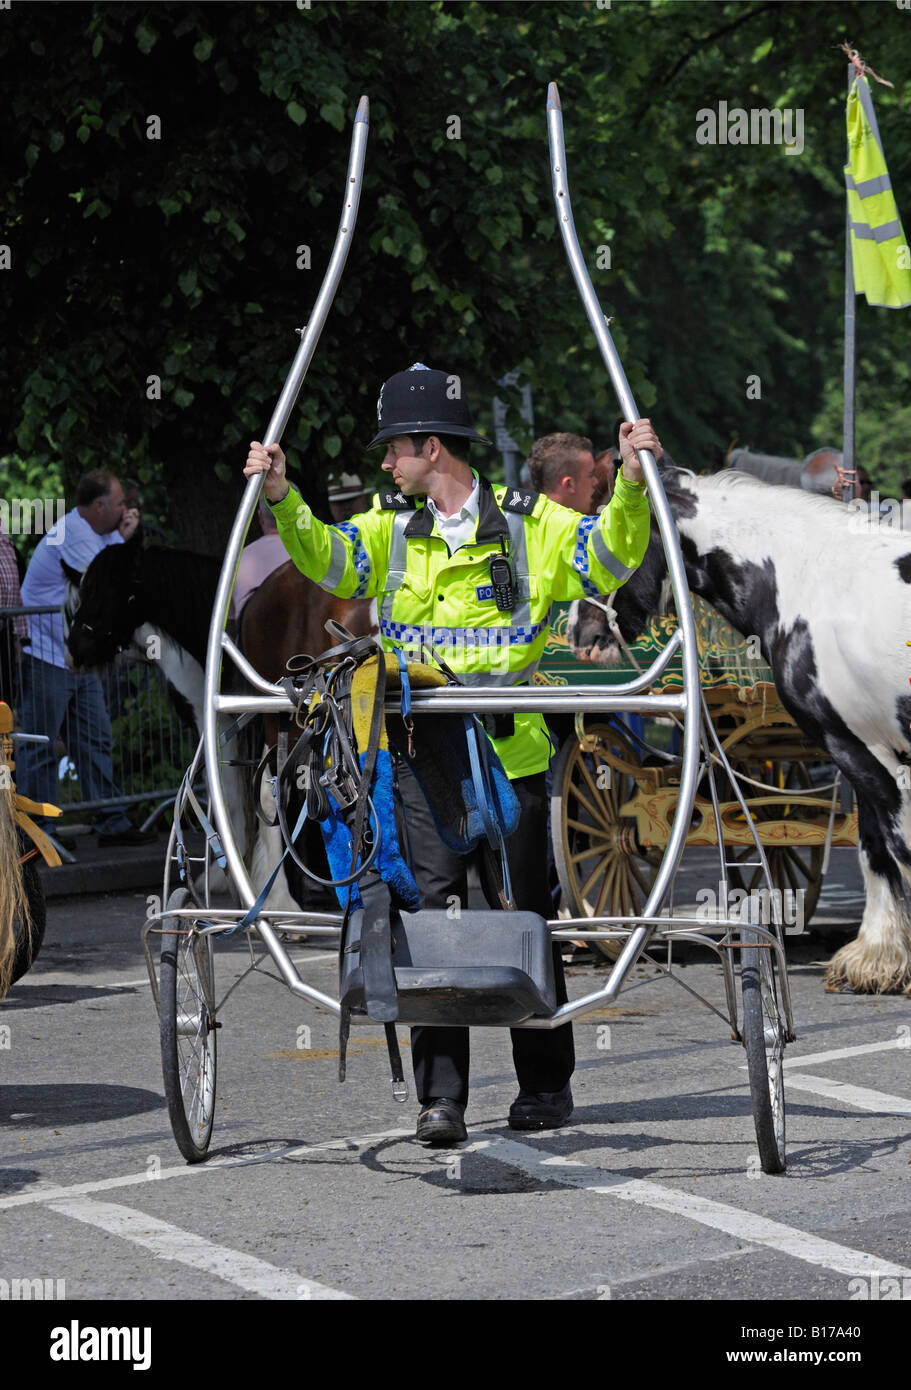 Policeman moving a trotting cart. Appleby Horse Fair. Appleby-in-Westmorland, Cumbria, England, United Kingdom, Europe. Stock Photo